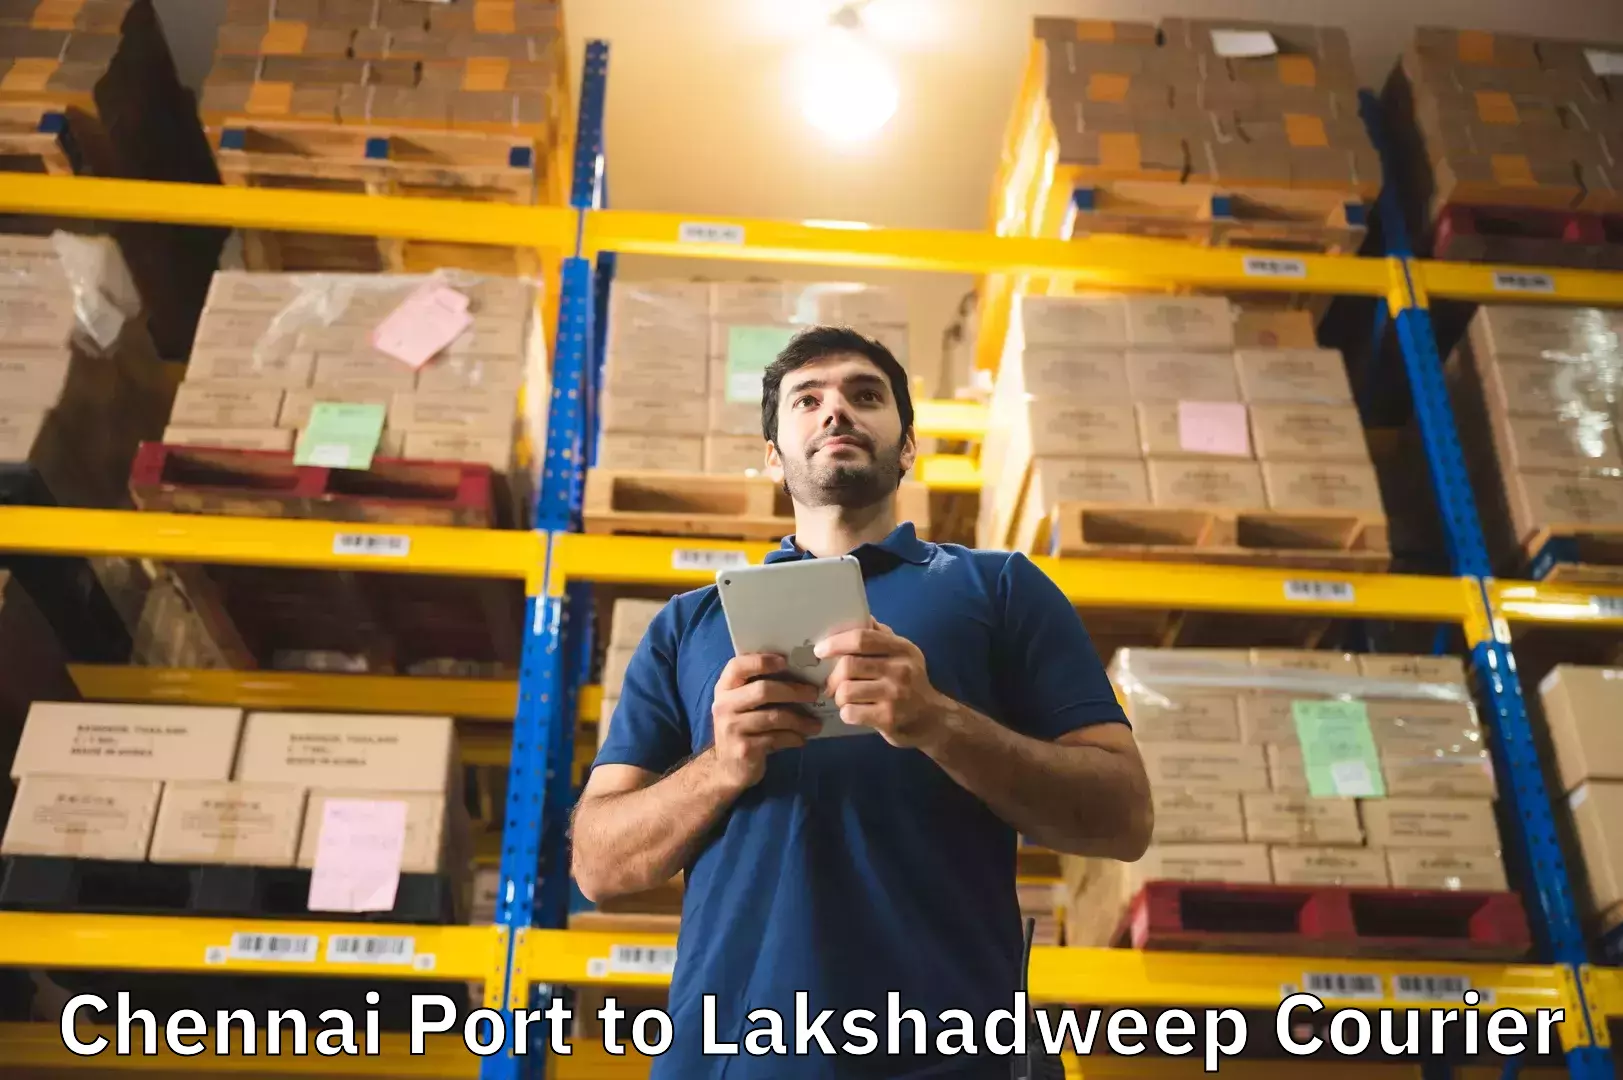 International baggage delivery in Chennai Port to Lakshadweep